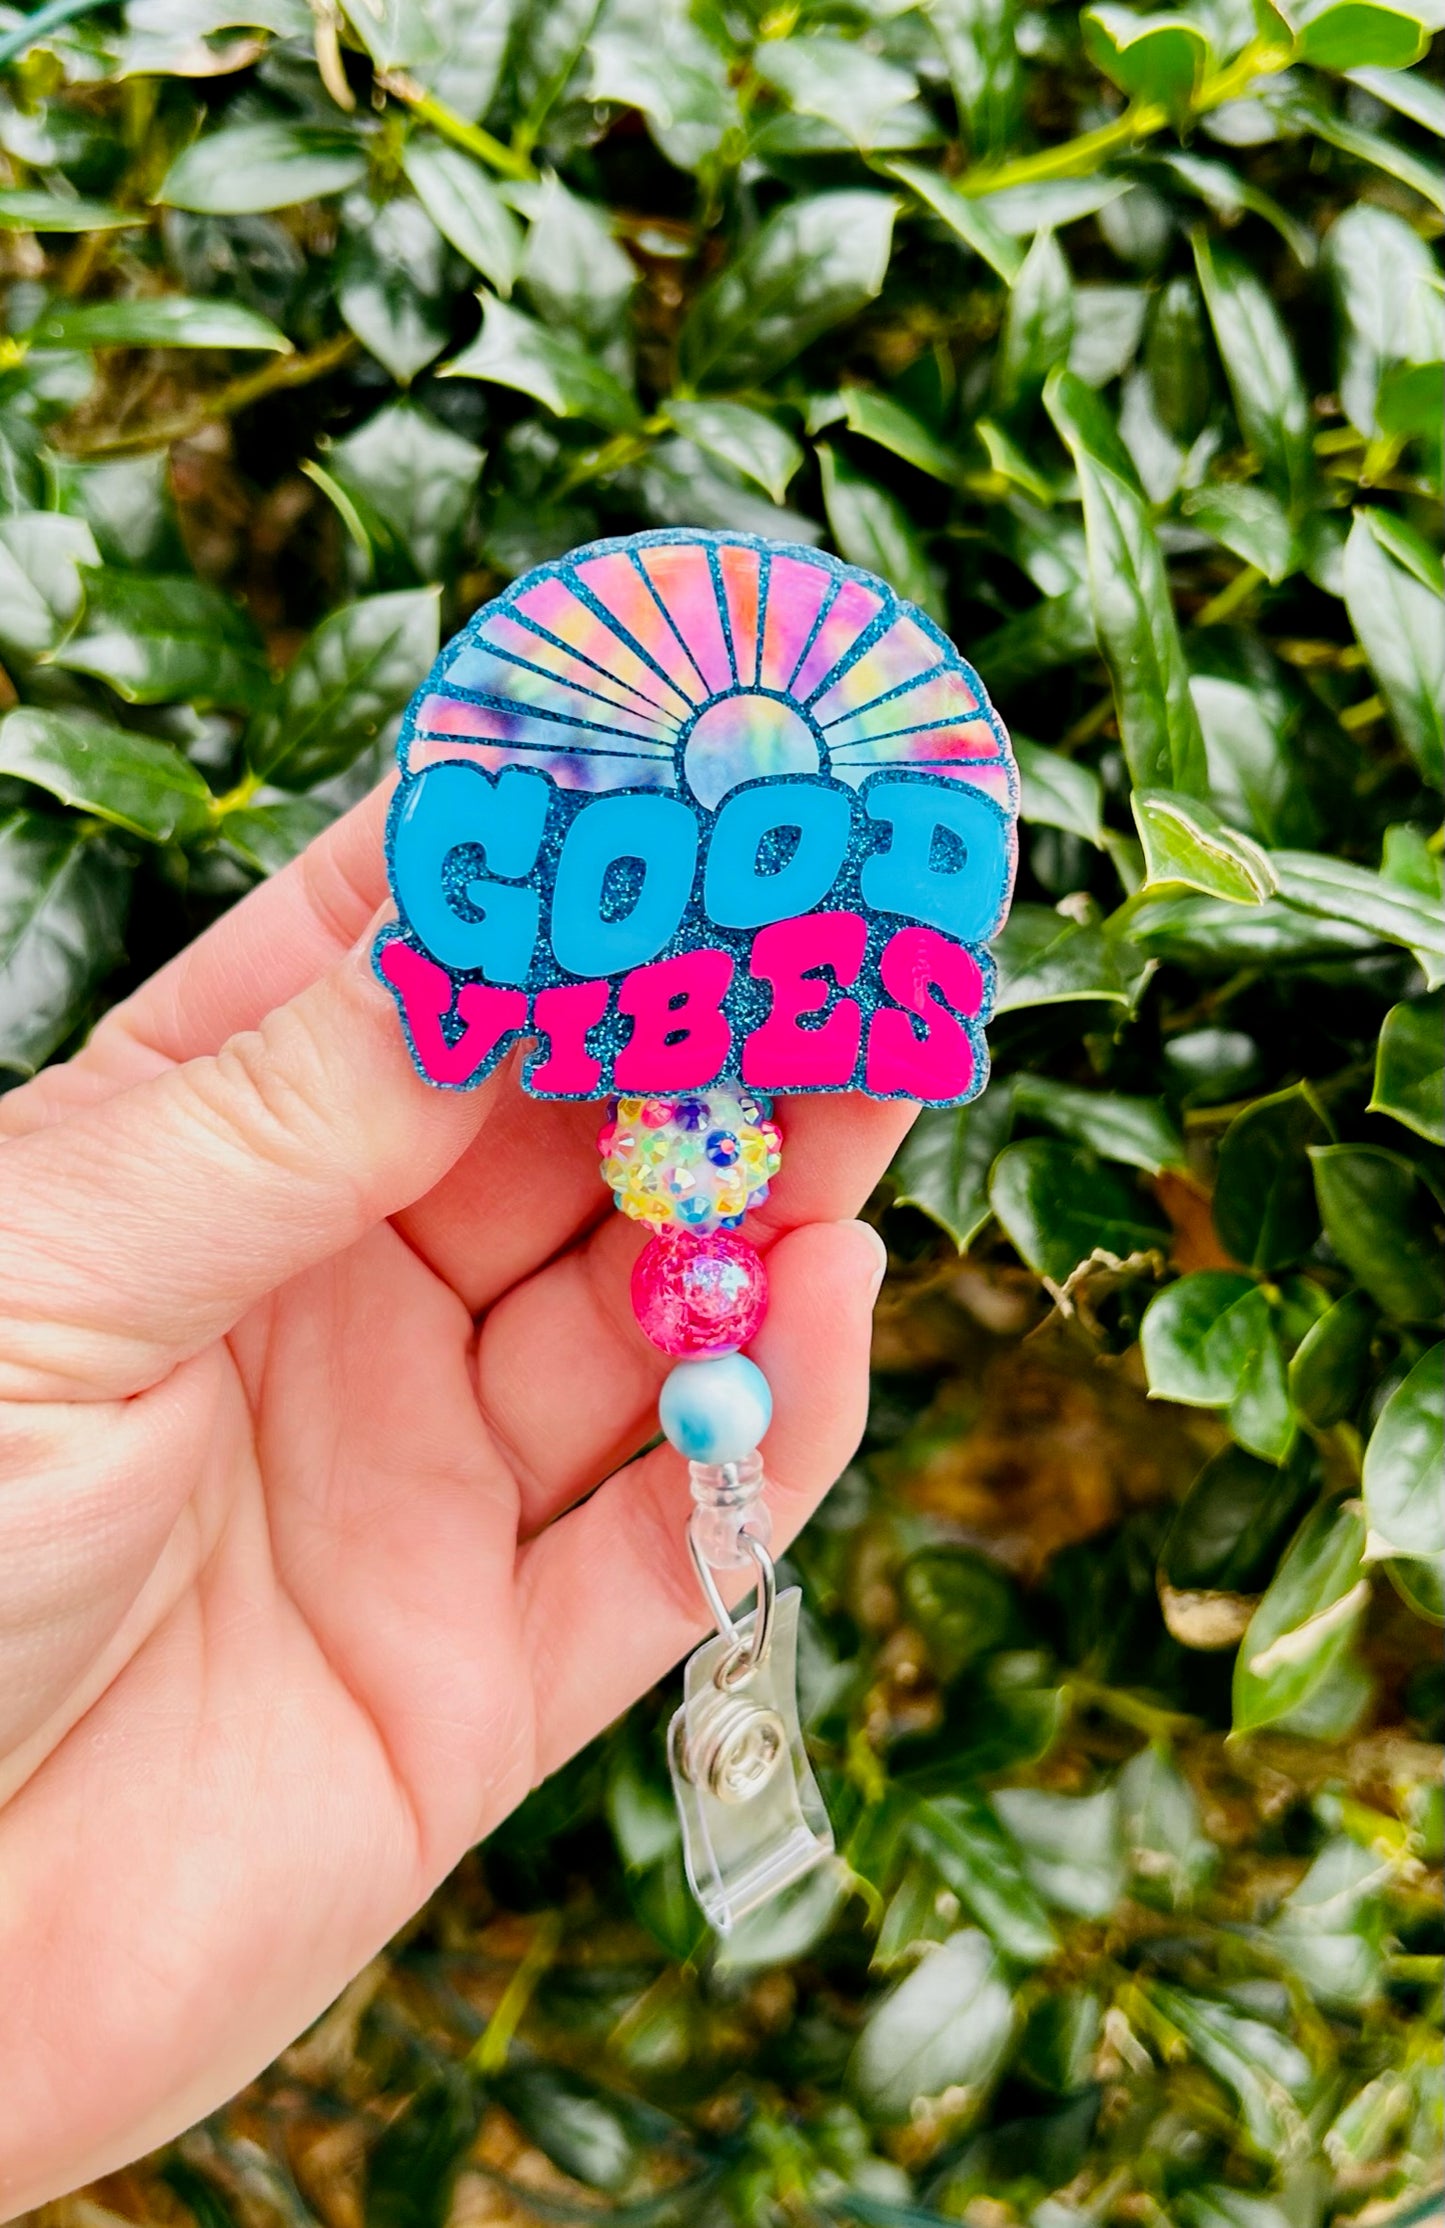 Good Vibes Only Badge Reel